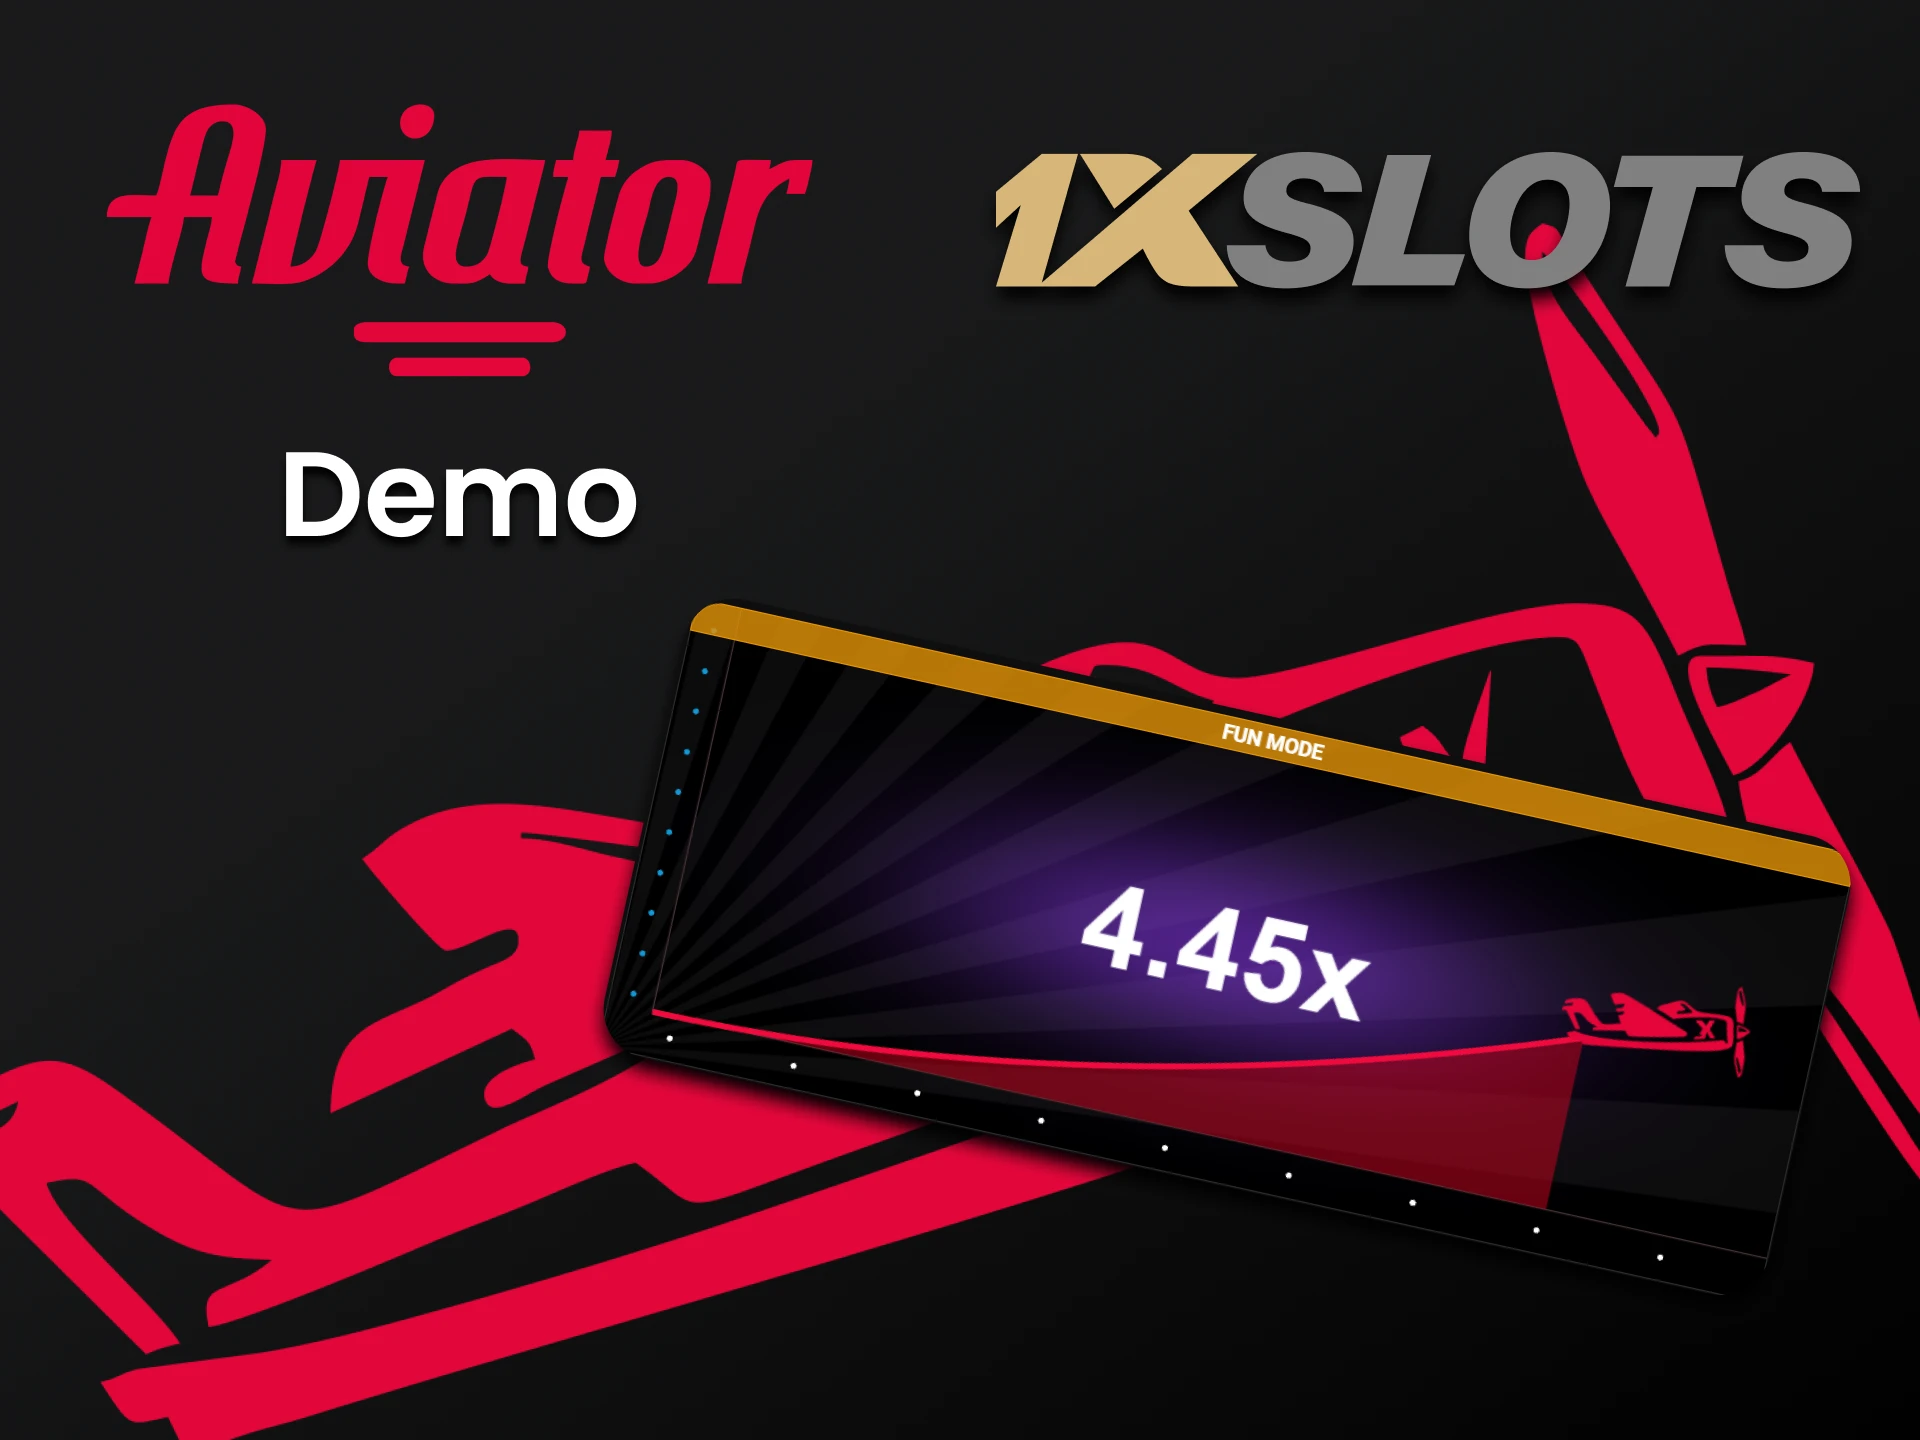 Practice in the demo version of Aviator at 1xslots.